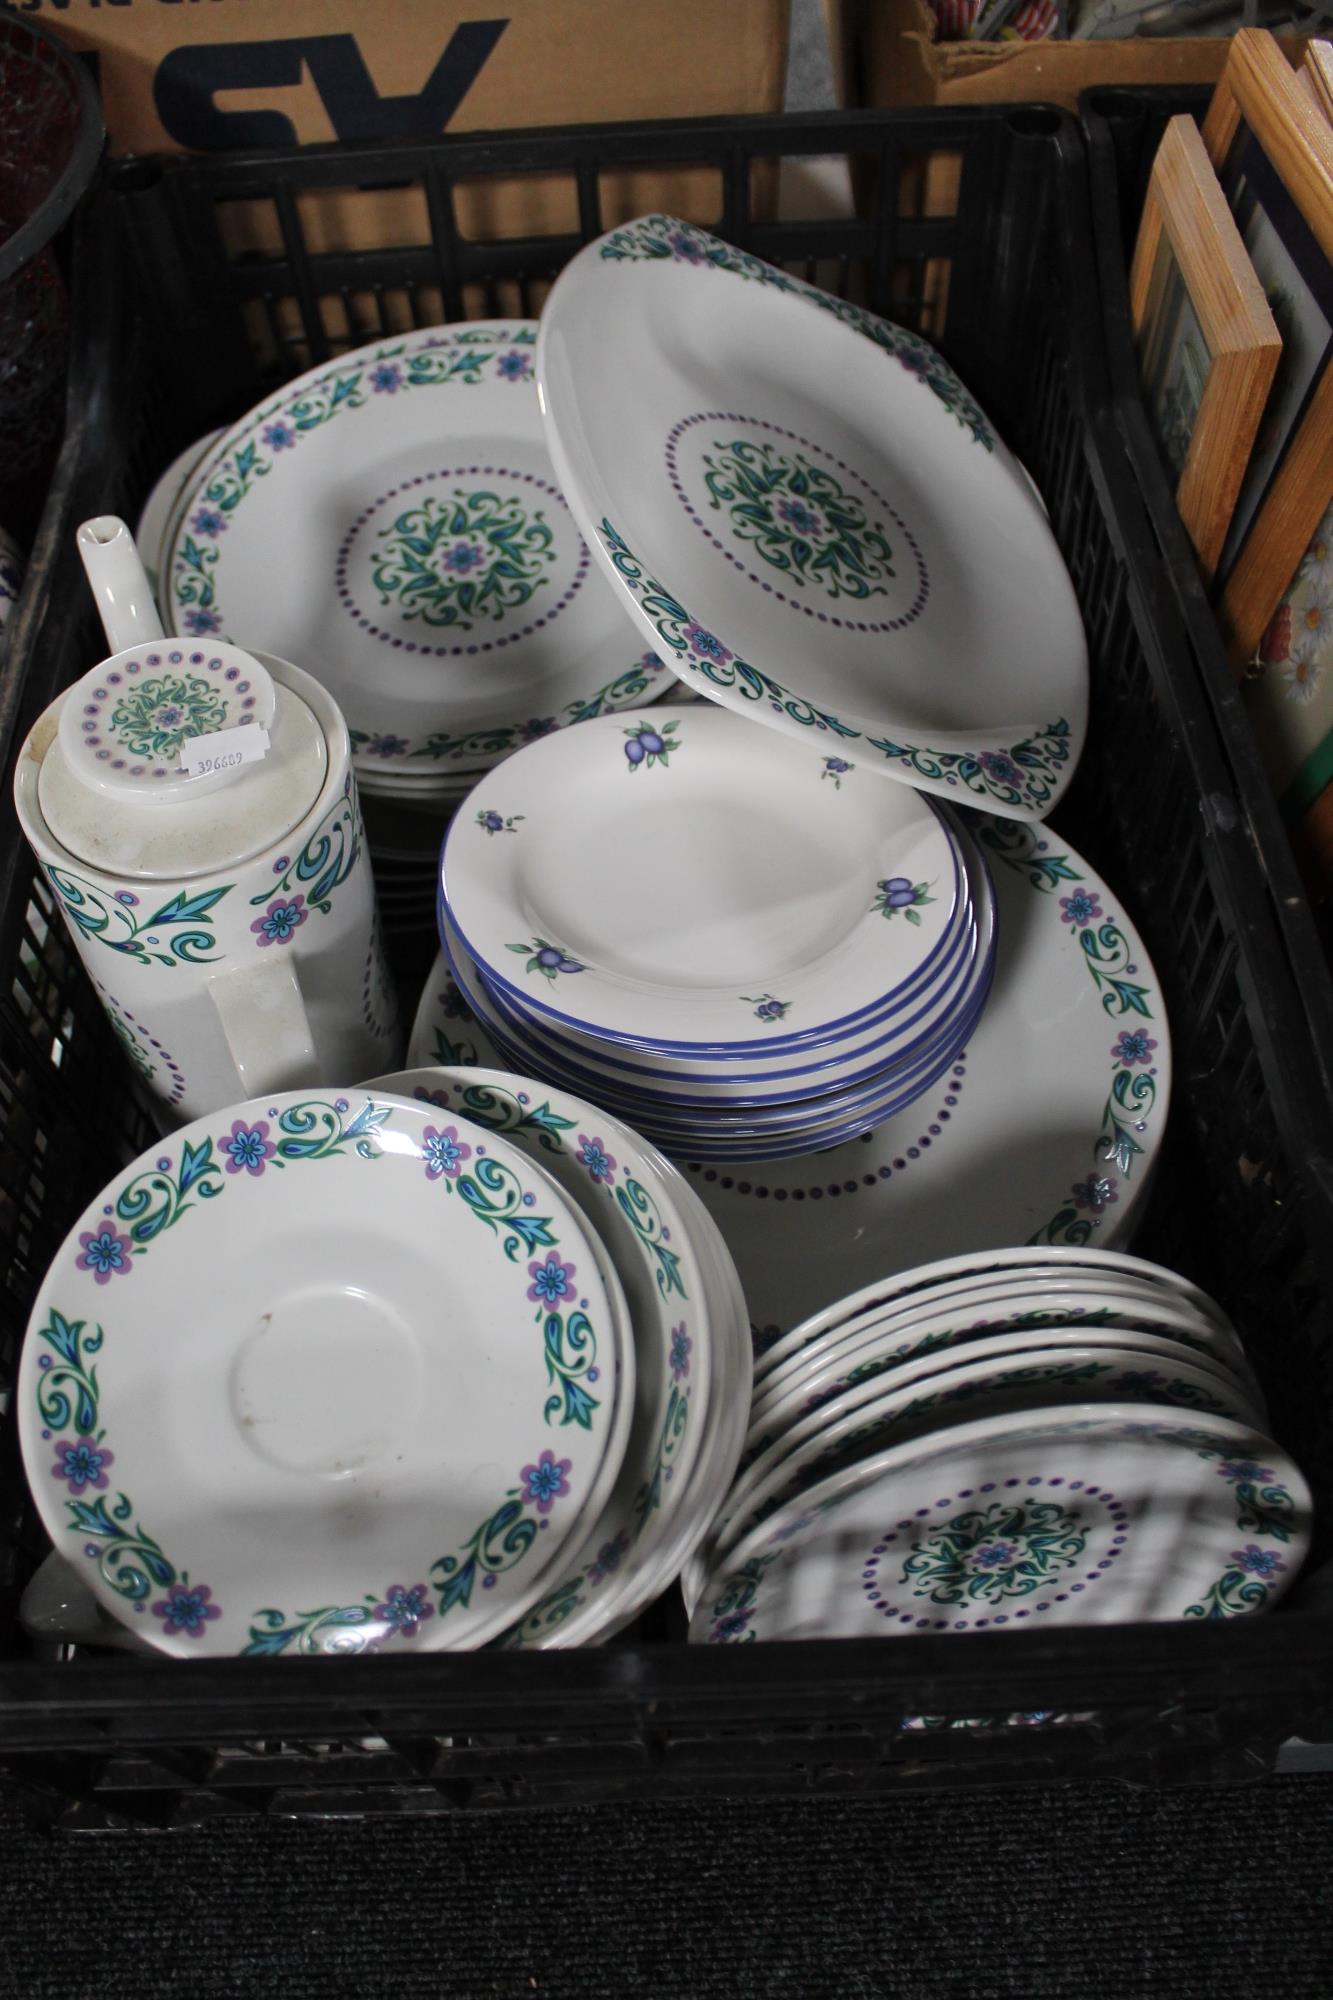 A tray of Meakin Studio tea and dinner ware,